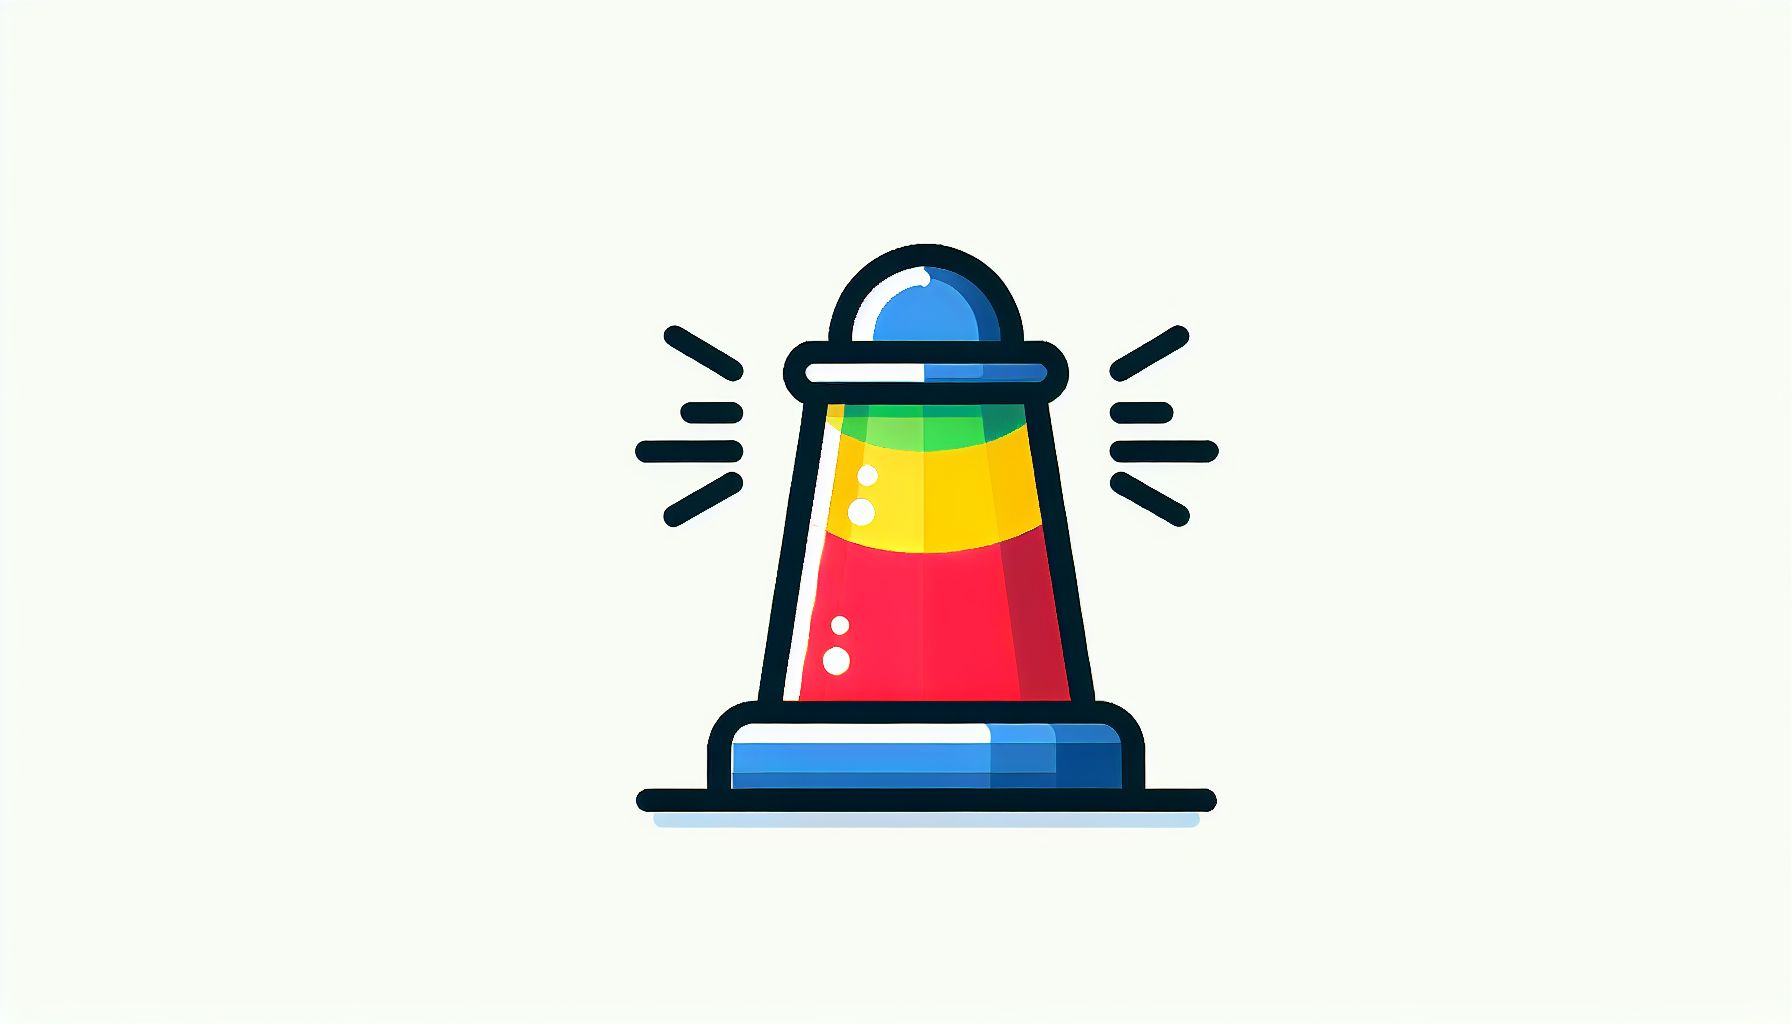 Beacon in flat illustration style and white background, red #f47574, green #88c7a8, yellow #fcc44b, and blue #645bc8 colors.